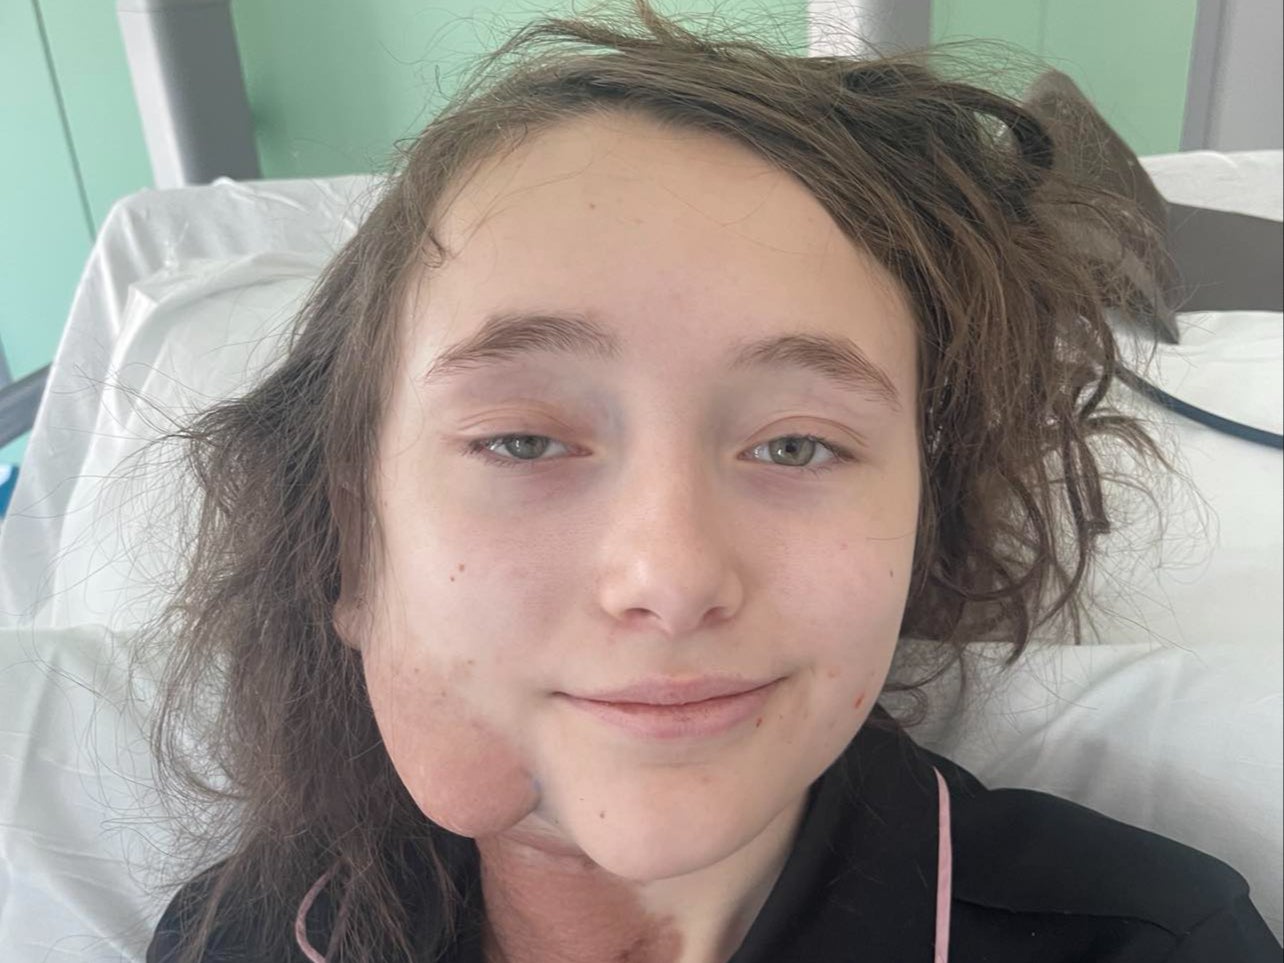 Phoebe Weston, 14, in hospital for her first surgery to remove tumours